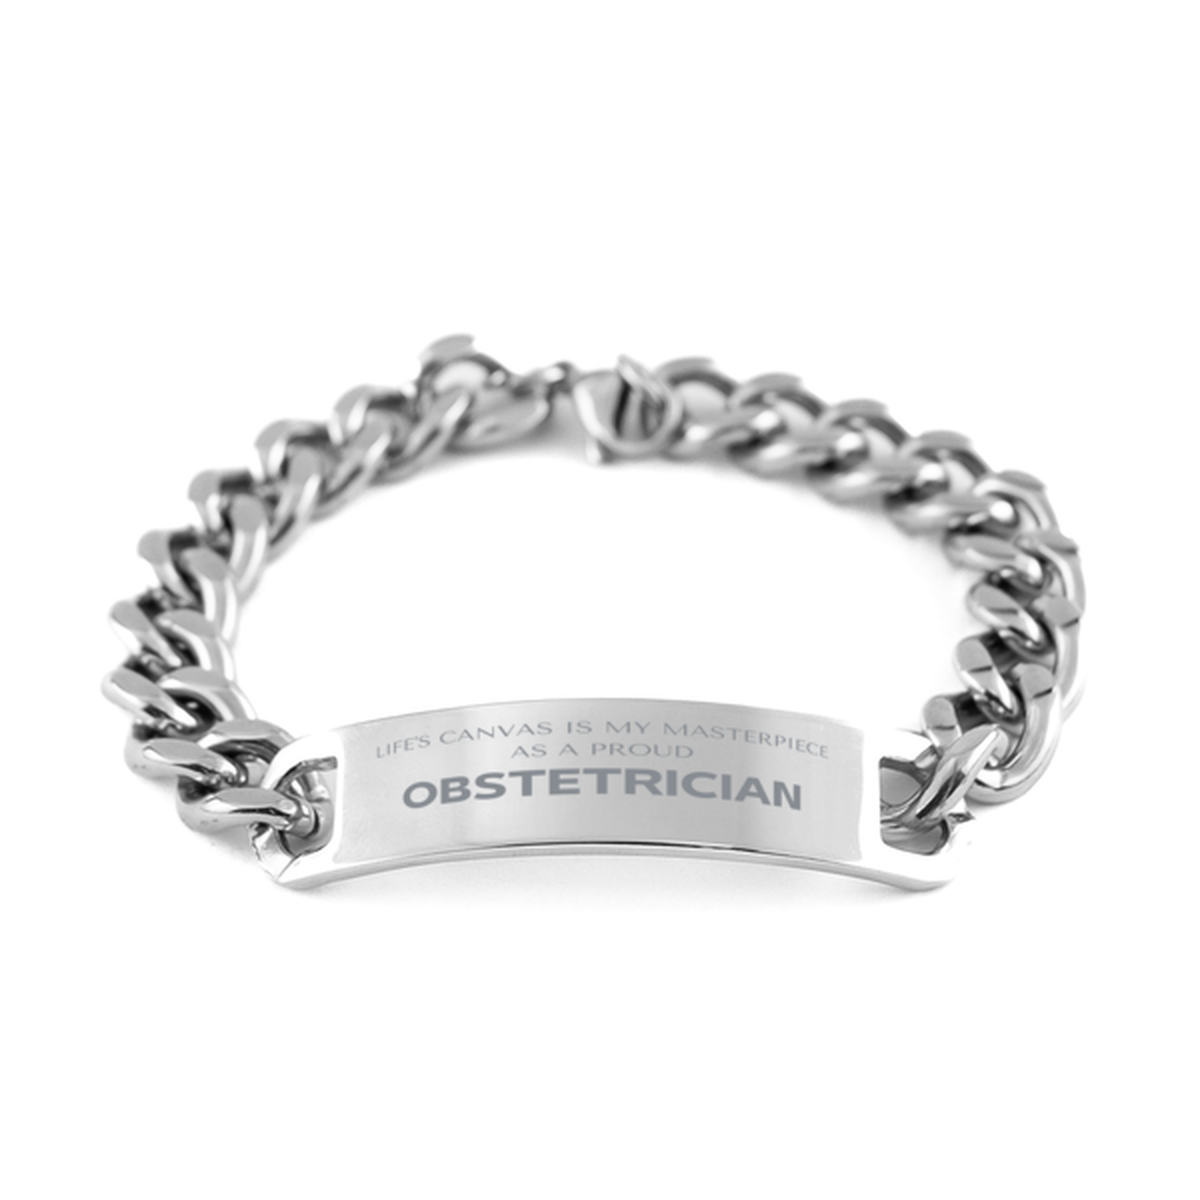 Proud Obstetrician Gifts, Life's canvas is my masterpiece, Epic Birthday Christmas Unique Cuban Chain Stainless Steel Bracelet For Obstetrician, Coworkers, Men, Women, Friends